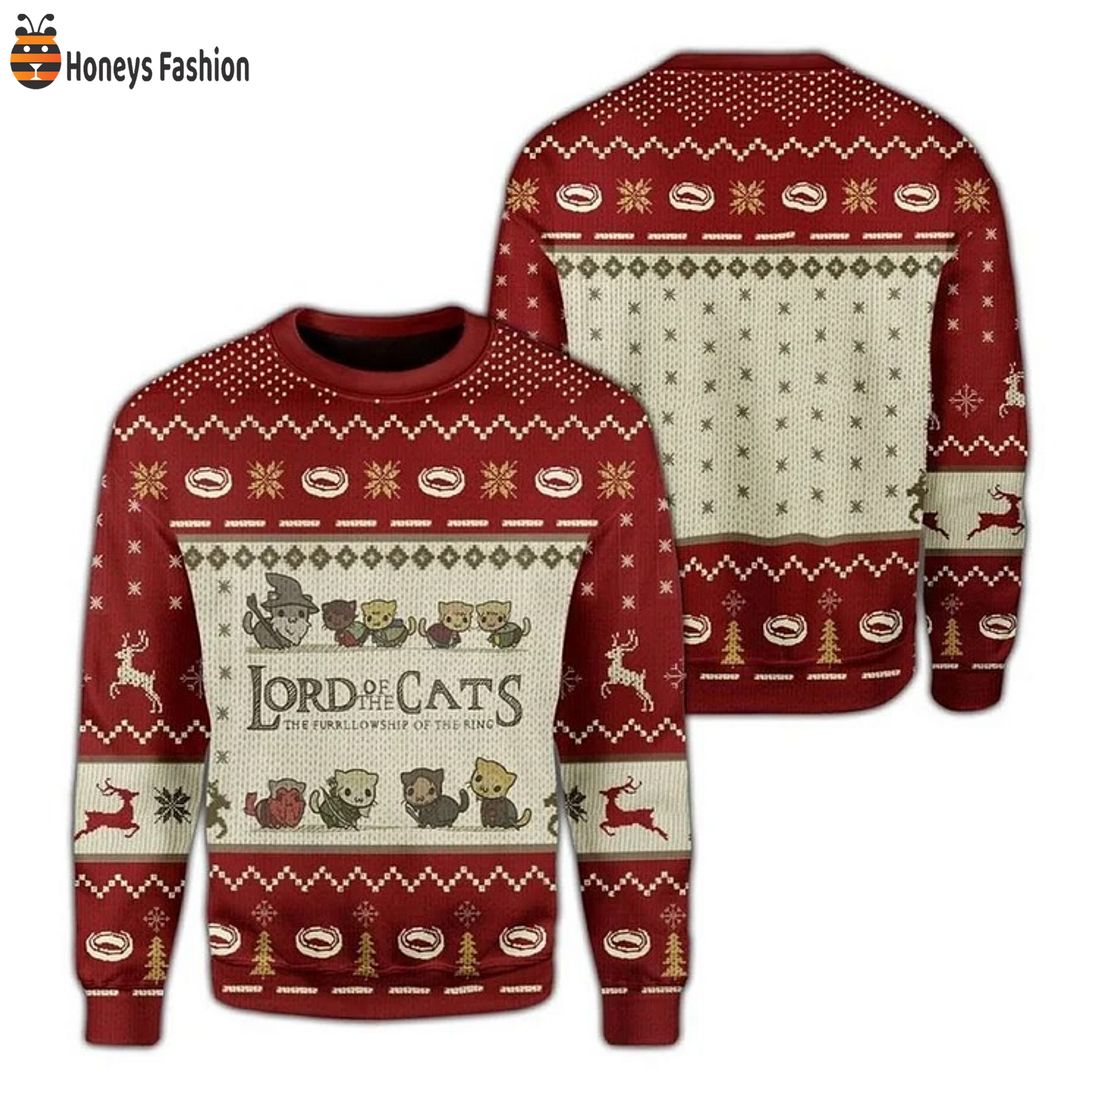 LOTR Lord of the cats ugly christmas sweater